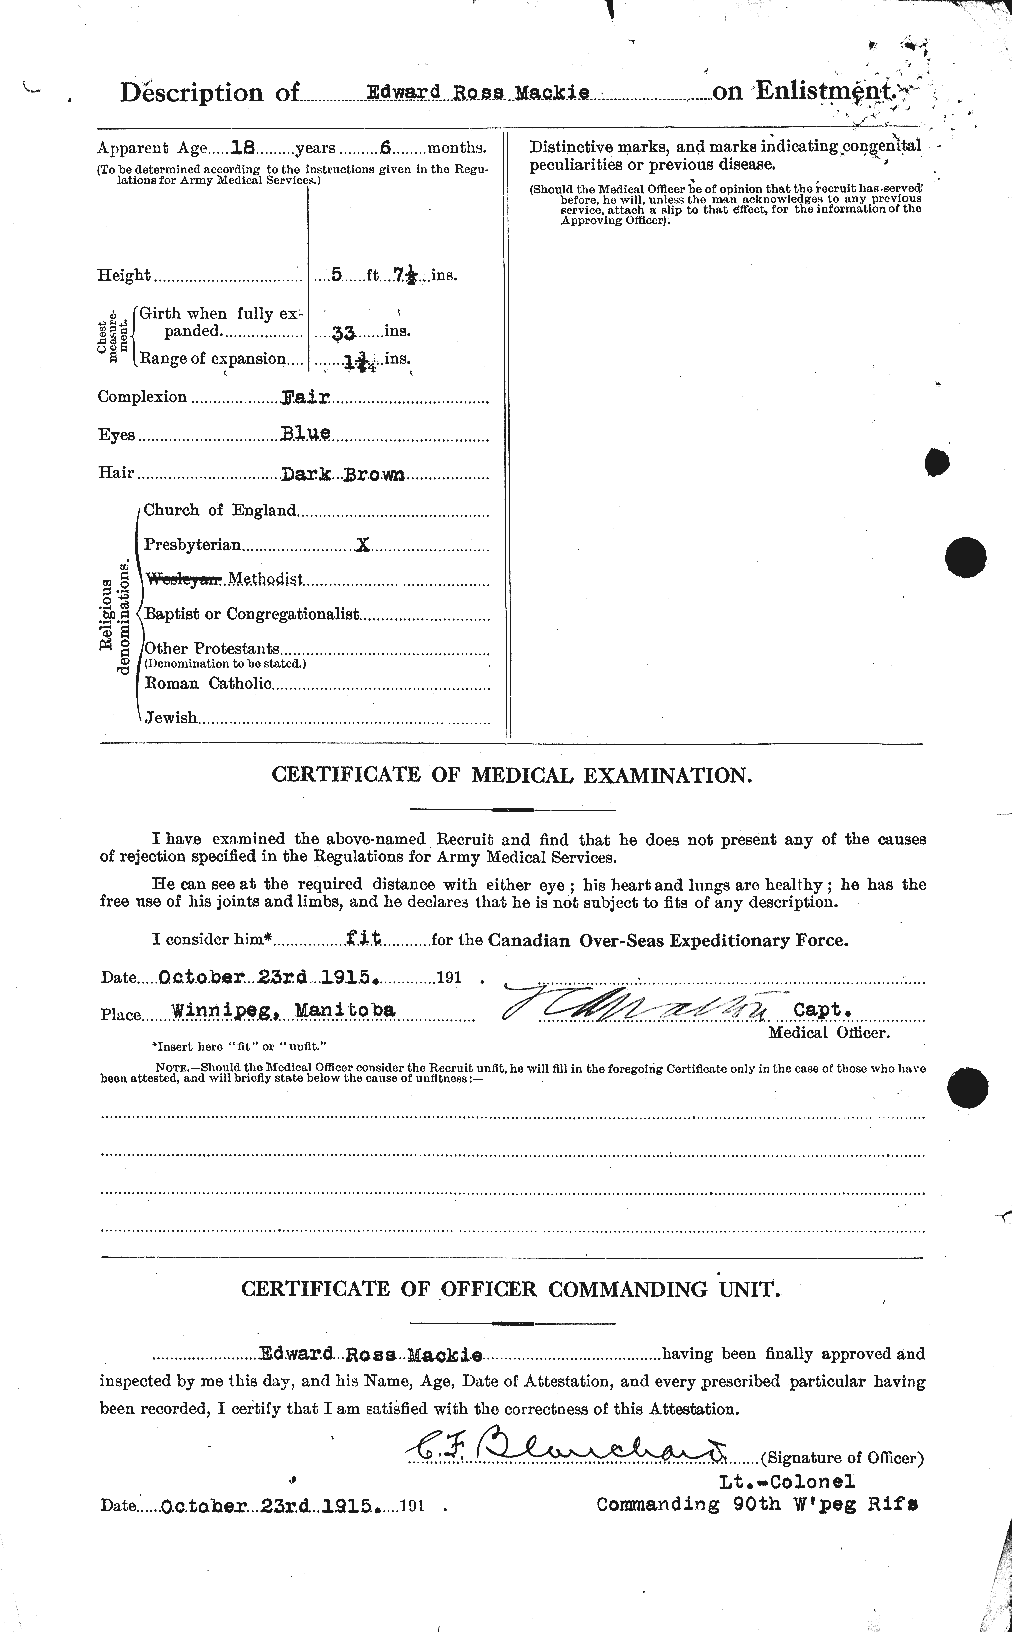 Personnel Records of the First World War - CEF 476258b